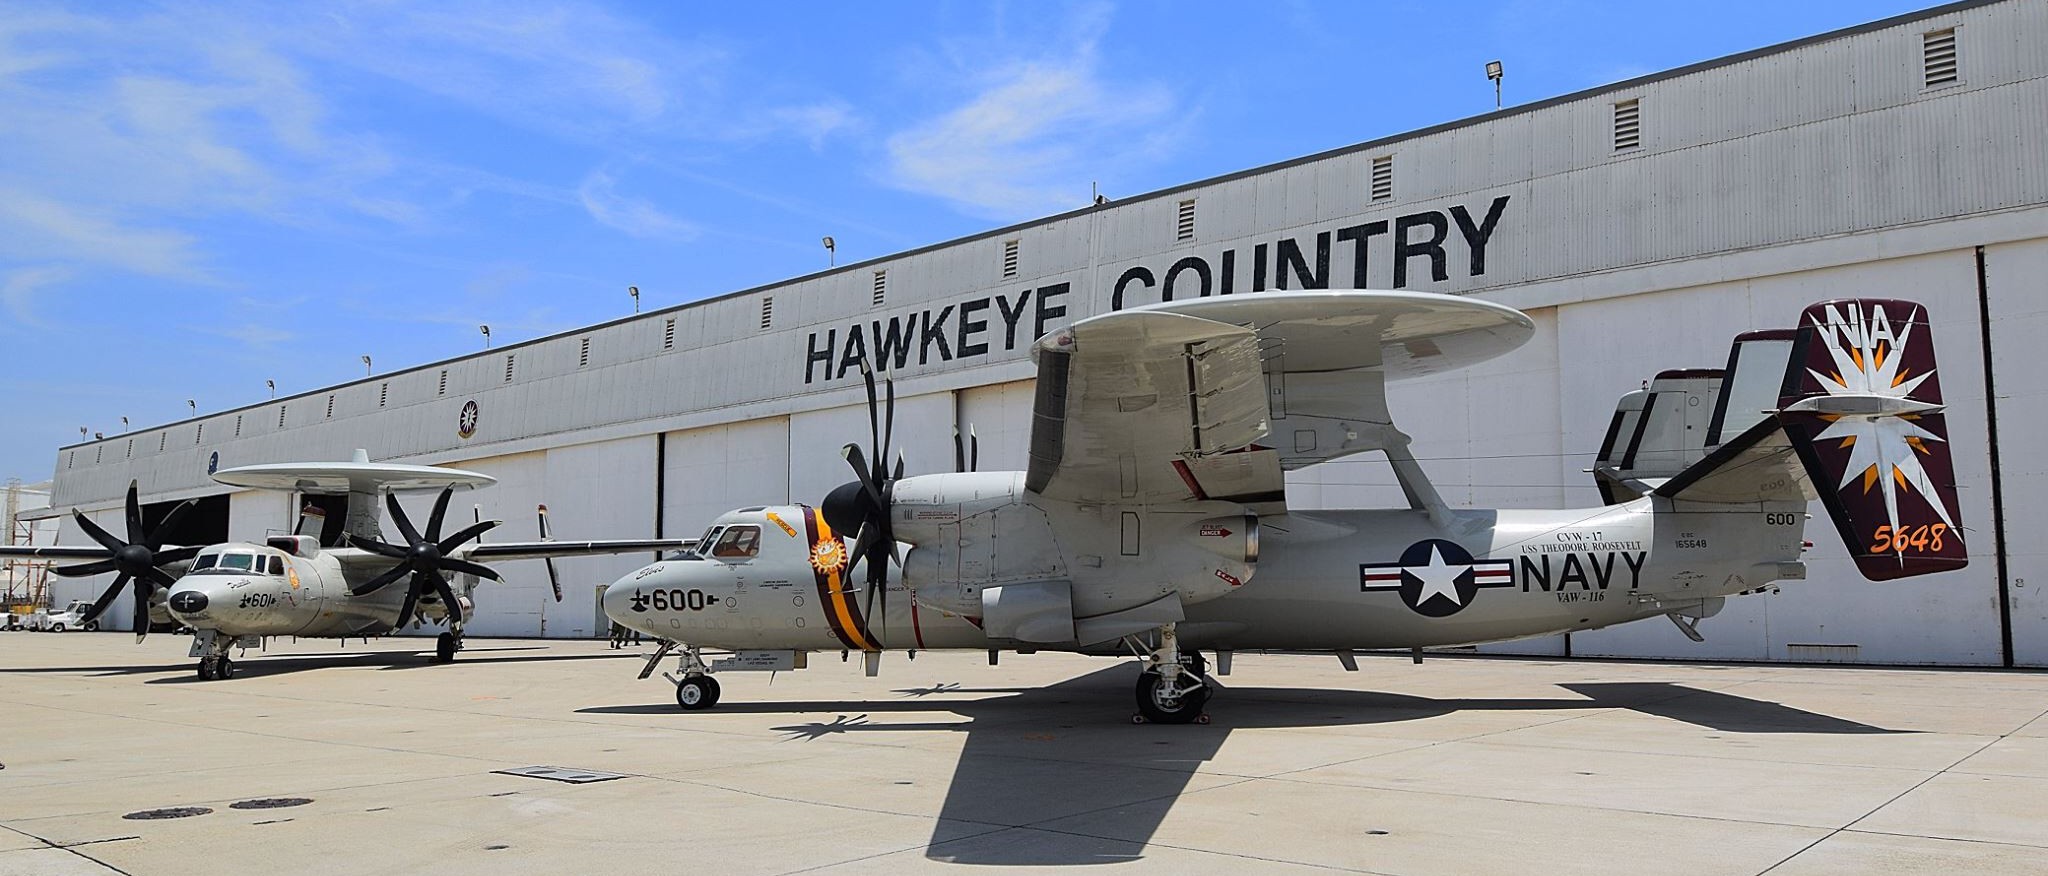 vaw-116 sun kings airborne command control squadron carrier early warning cvw-17 naval base ventura county point mugu 75